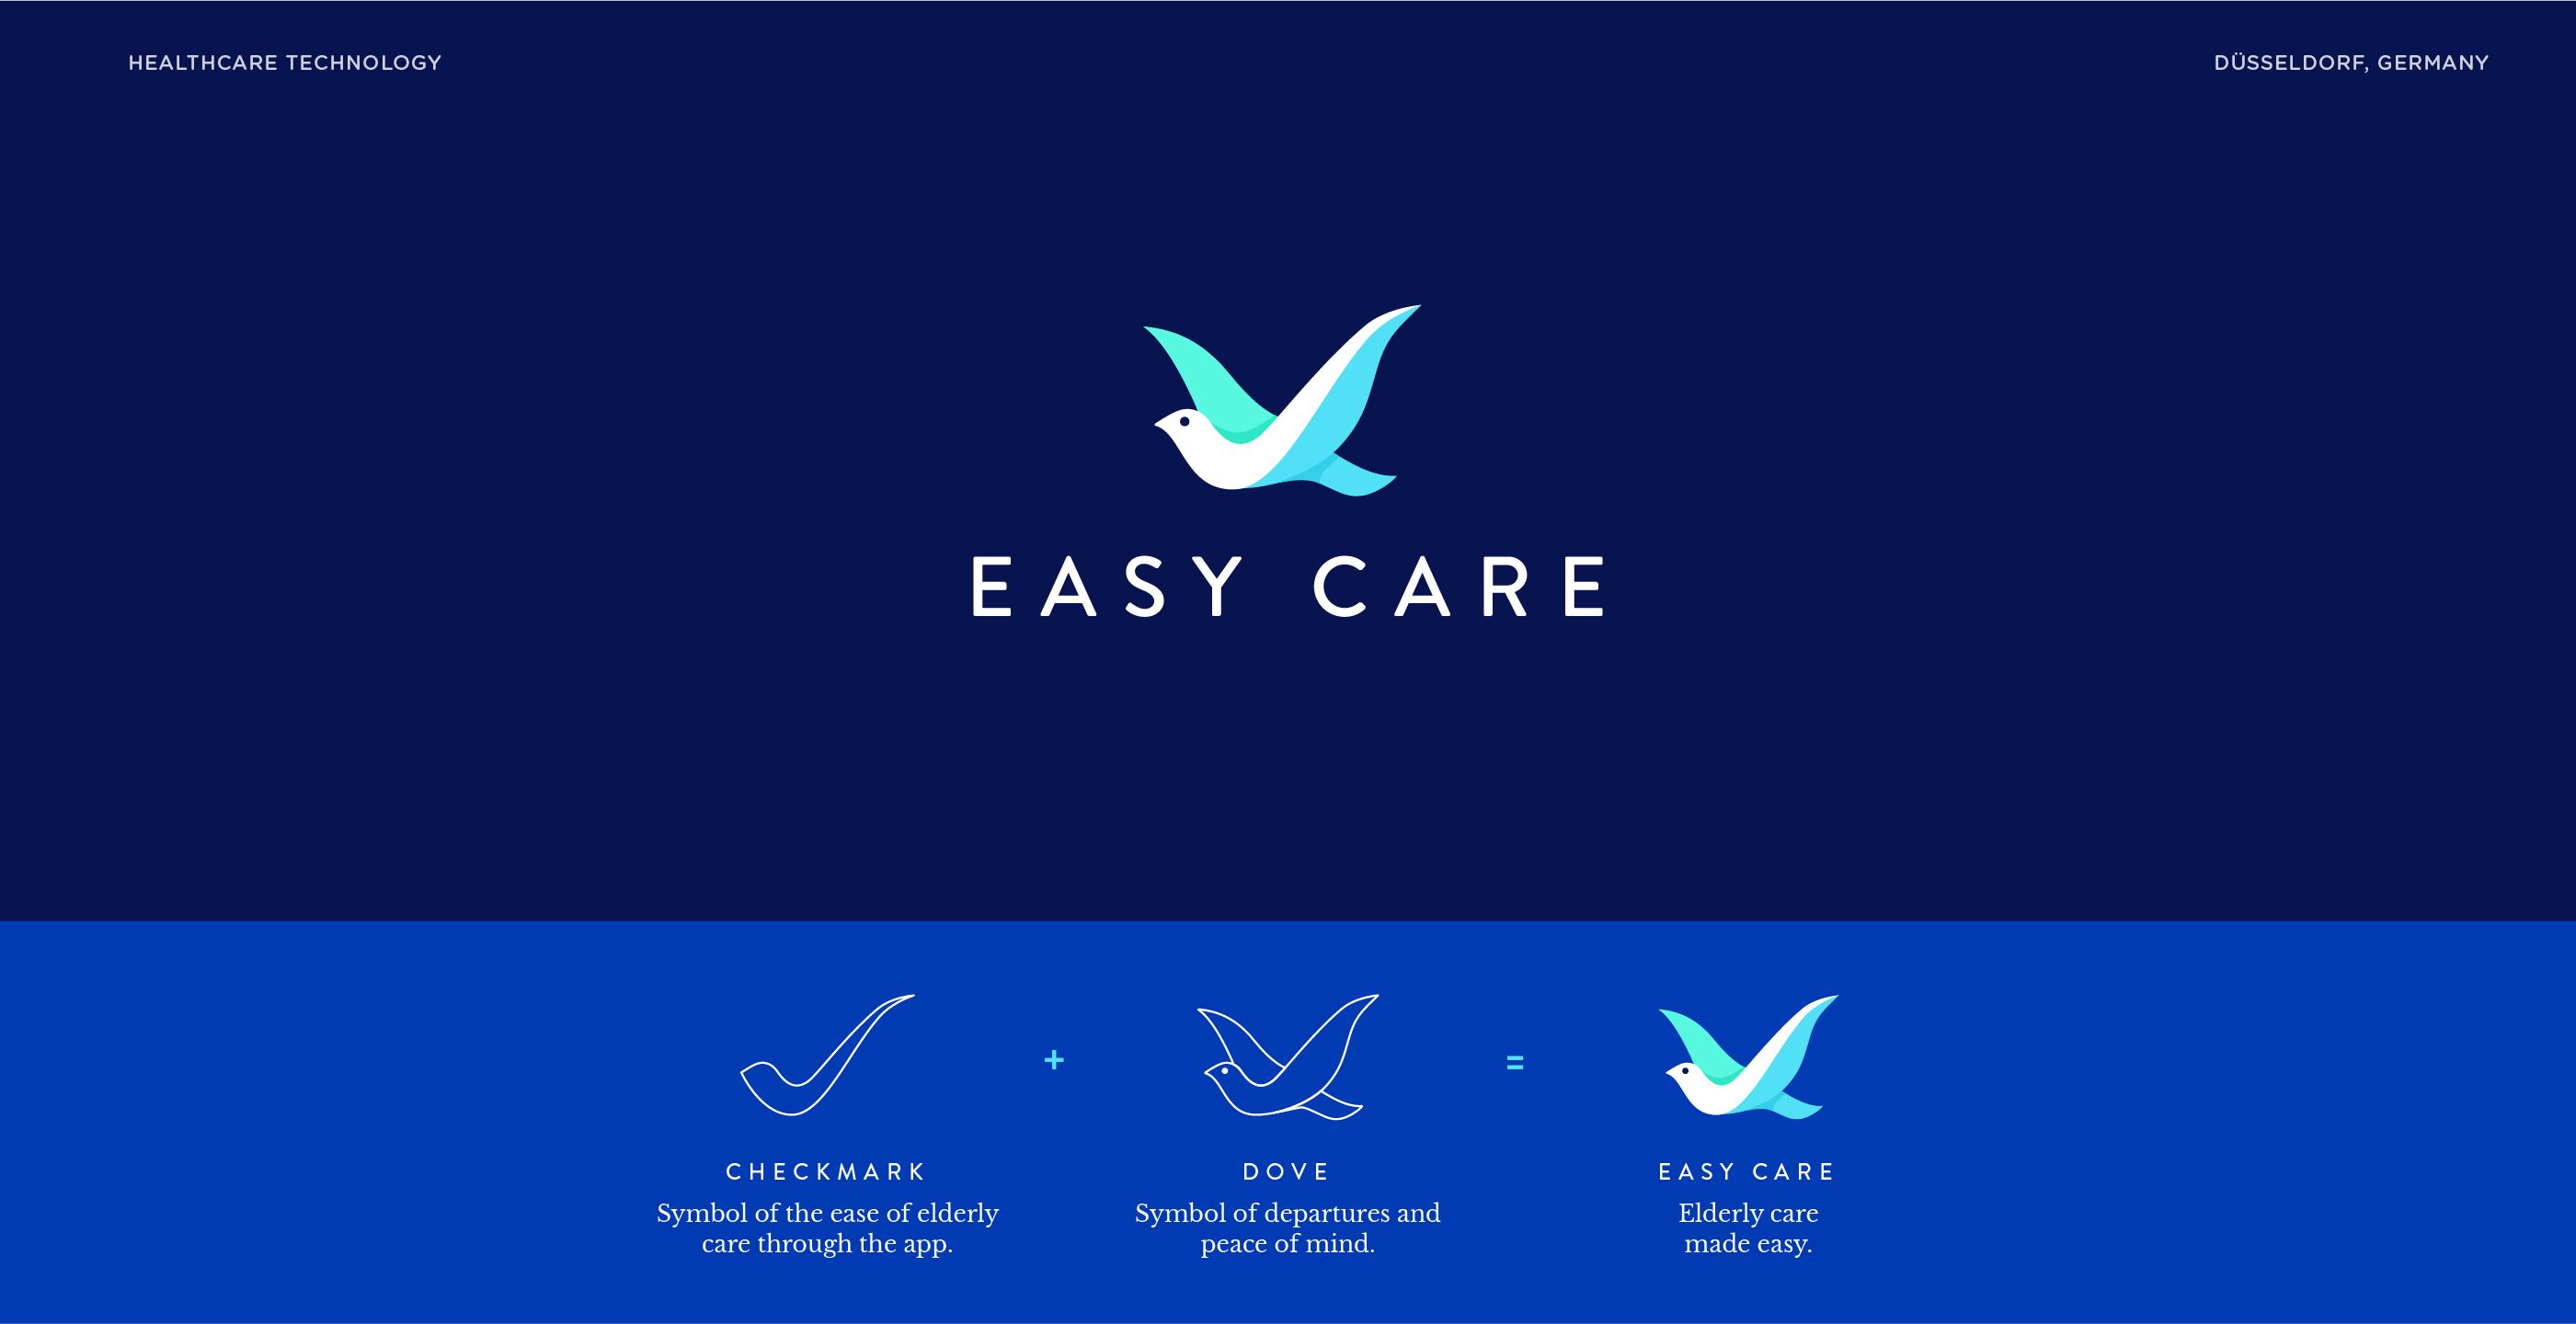 Easy Care – healthcare technology